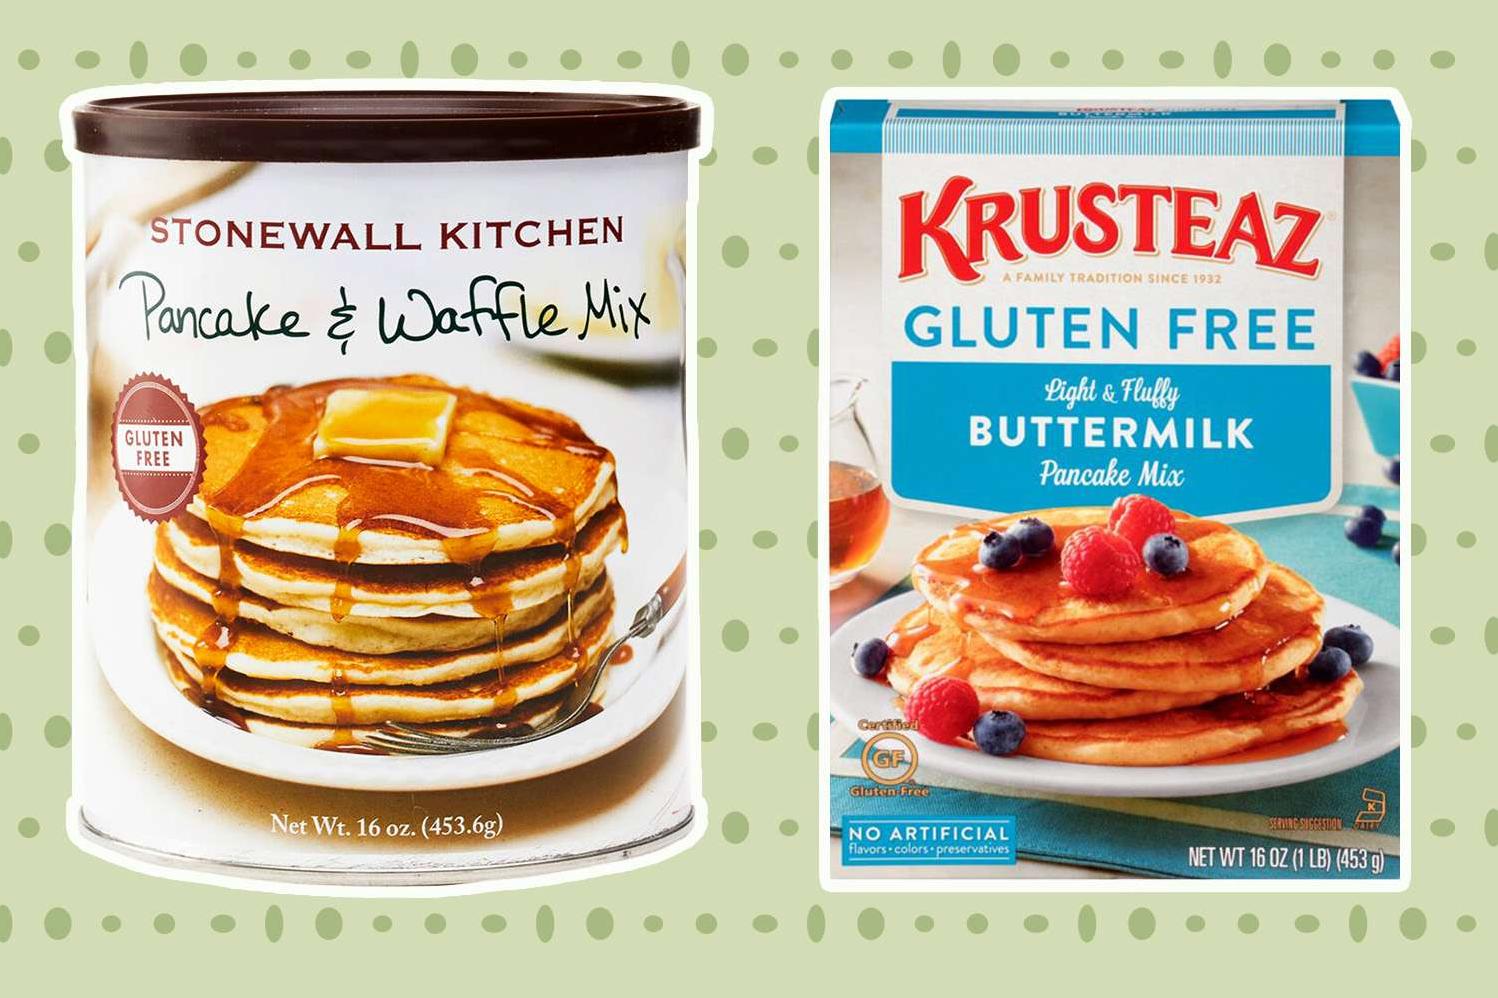  Crispy on the outside, soft on the inside - gluten-free pancakes for everyone!